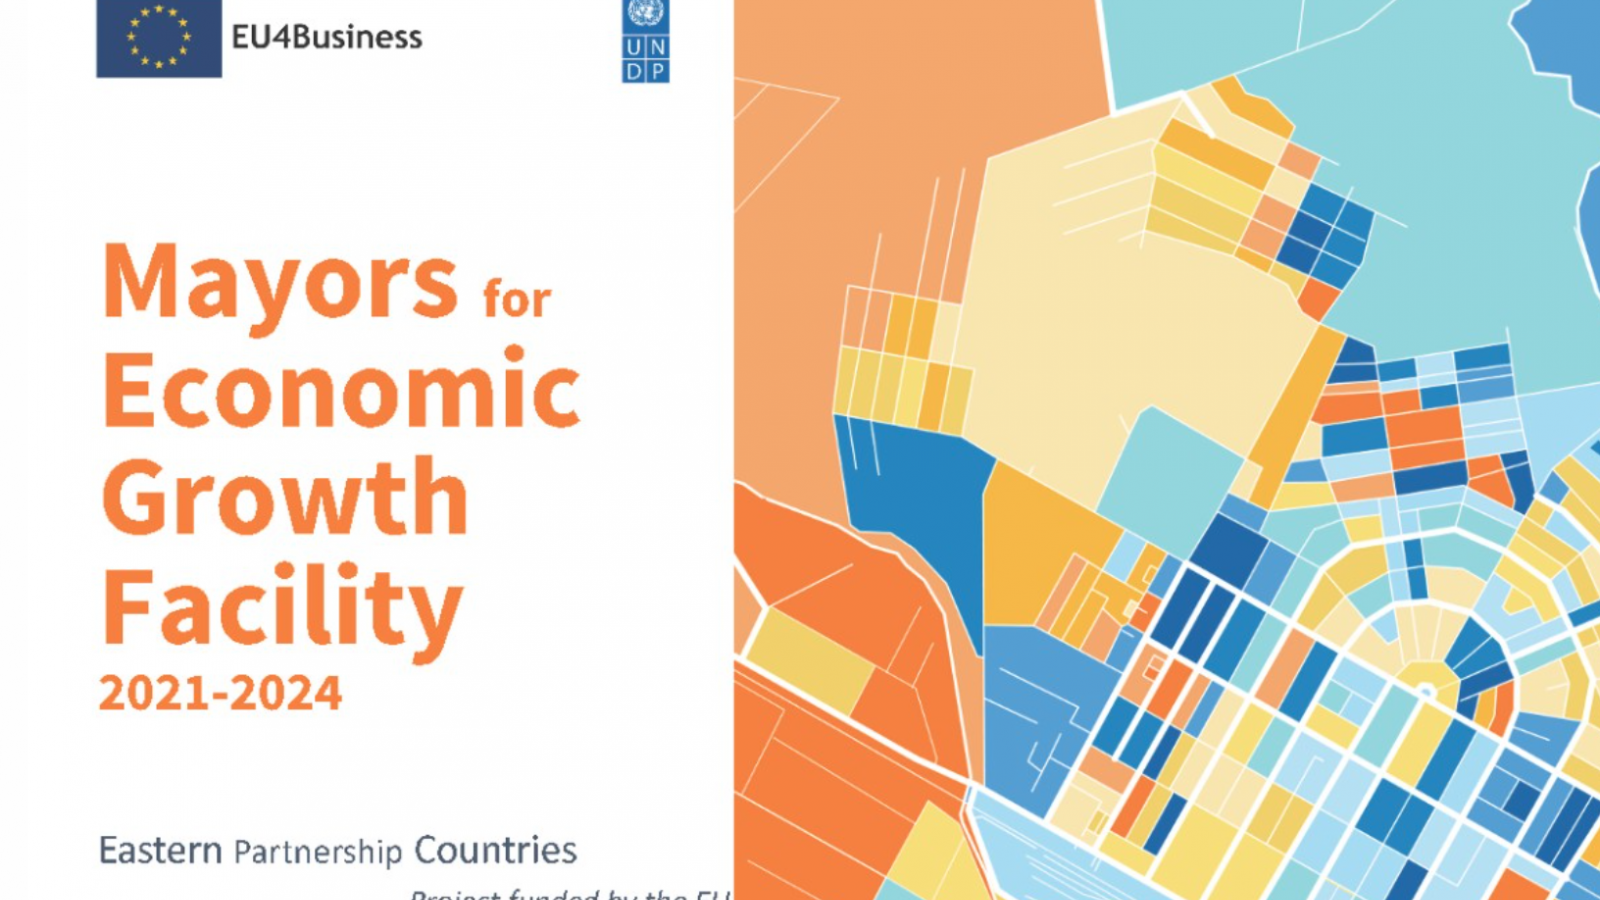 EU and UNDP launch new Mayors for Economic Growth (M4EG) Facility for Eastern Partnership countries